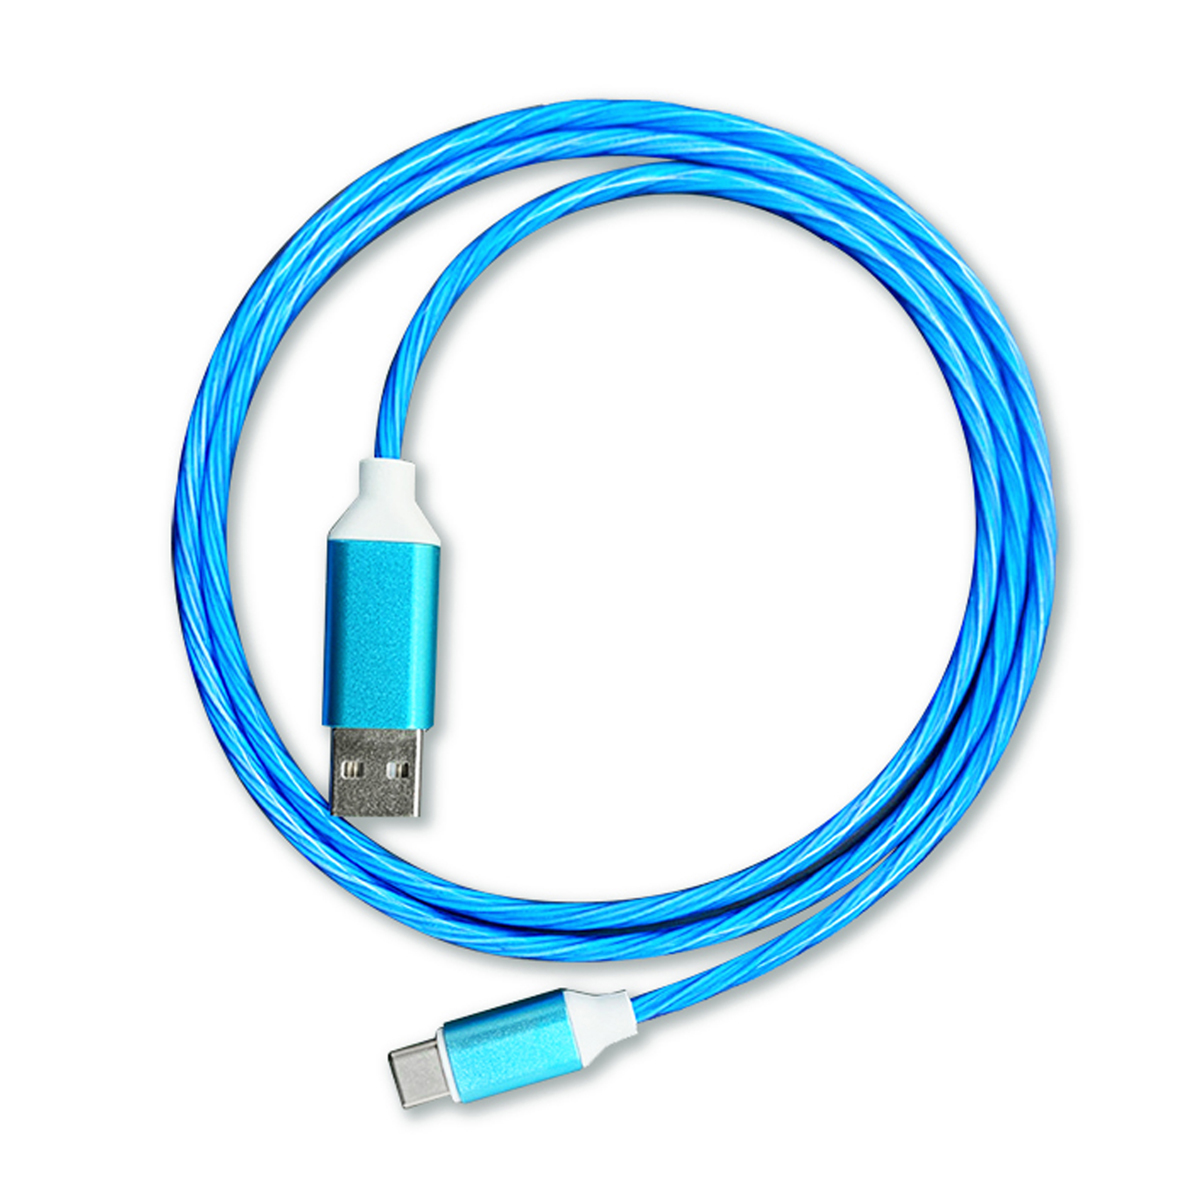 Platinet USB USB A - USB Type-C charging cable with LED color light effect BLUE - 2A, 1m, *USBAM, *USBCM